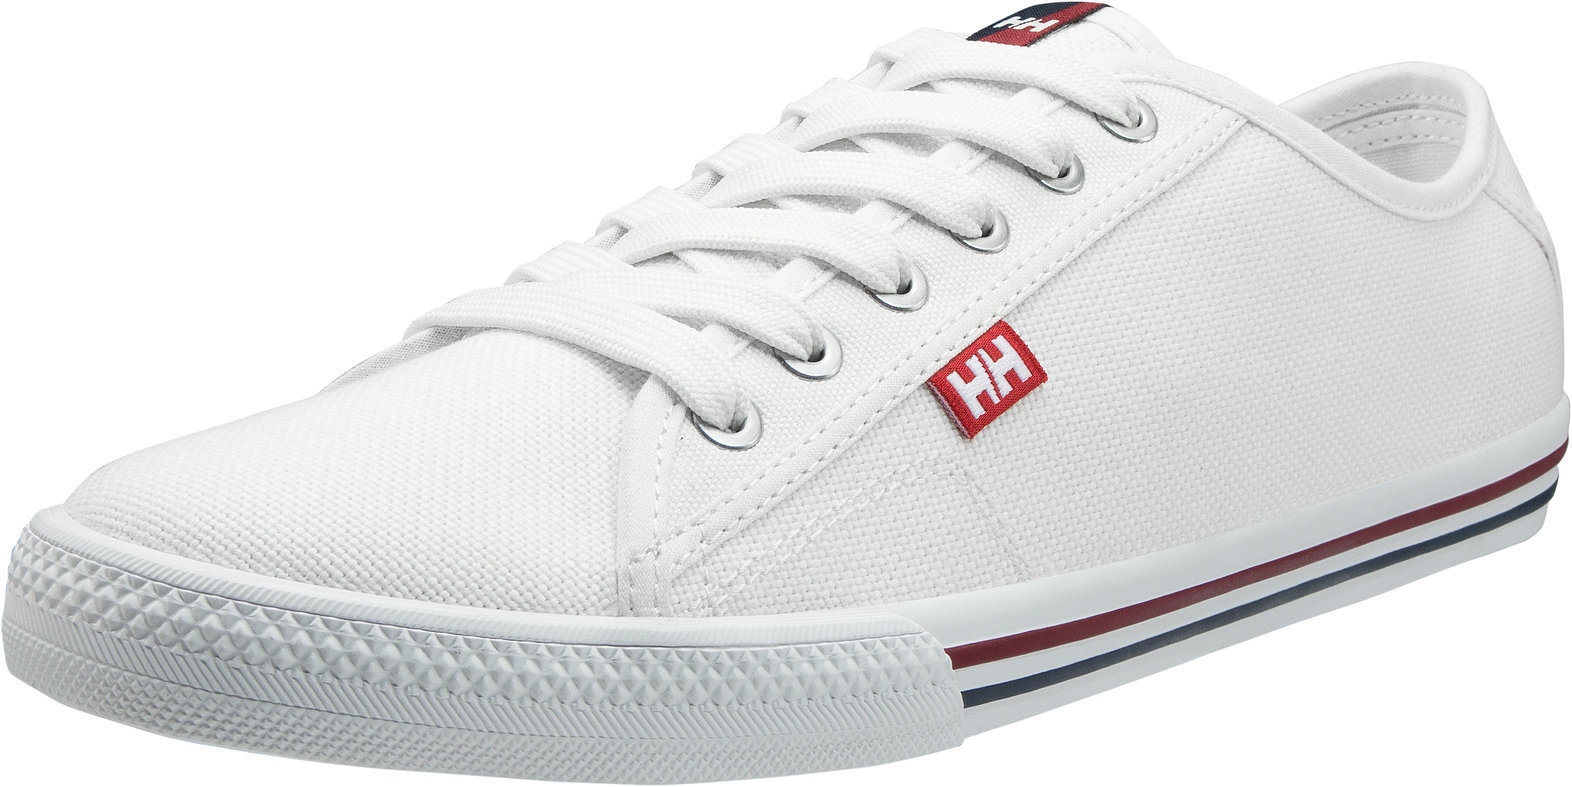 Mens Sailing Shoes Helly Hansen FJORD CANVAS OFF WHITE 45